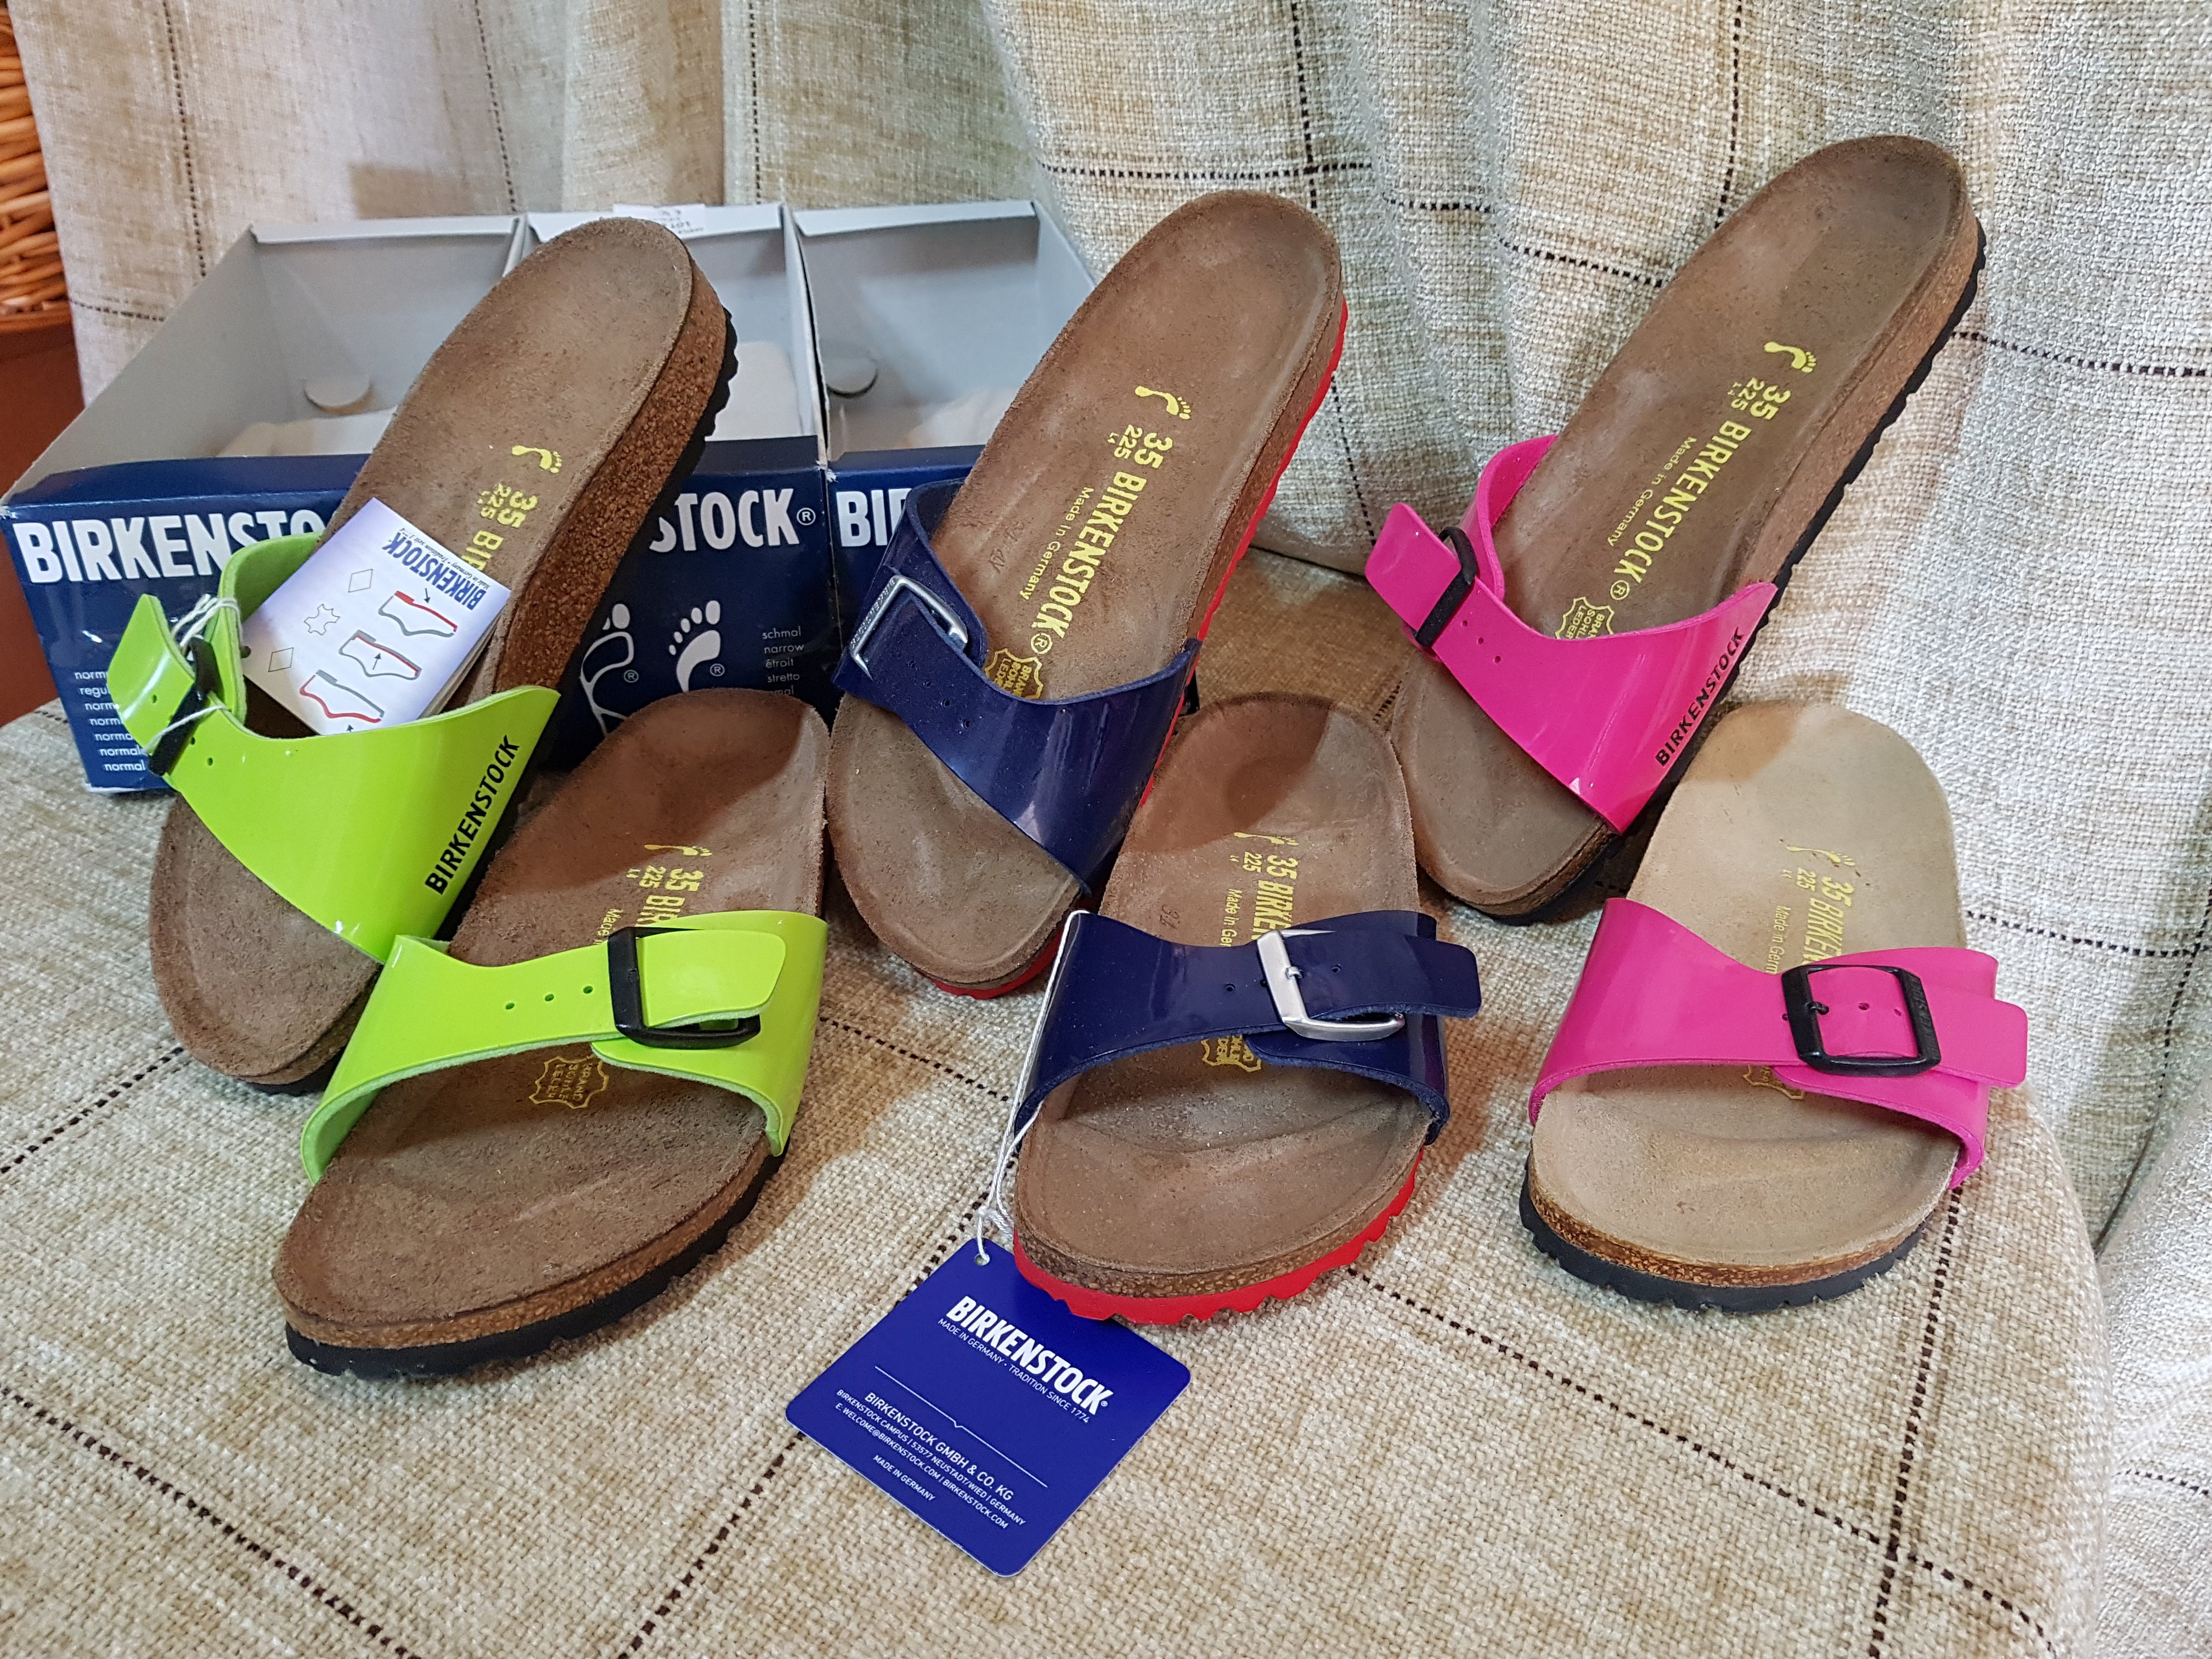 €1 NO RESERVE BIRKENSTOCK SHOE MEGA CLEARANCE AUCTION – ALL MUST SELL!